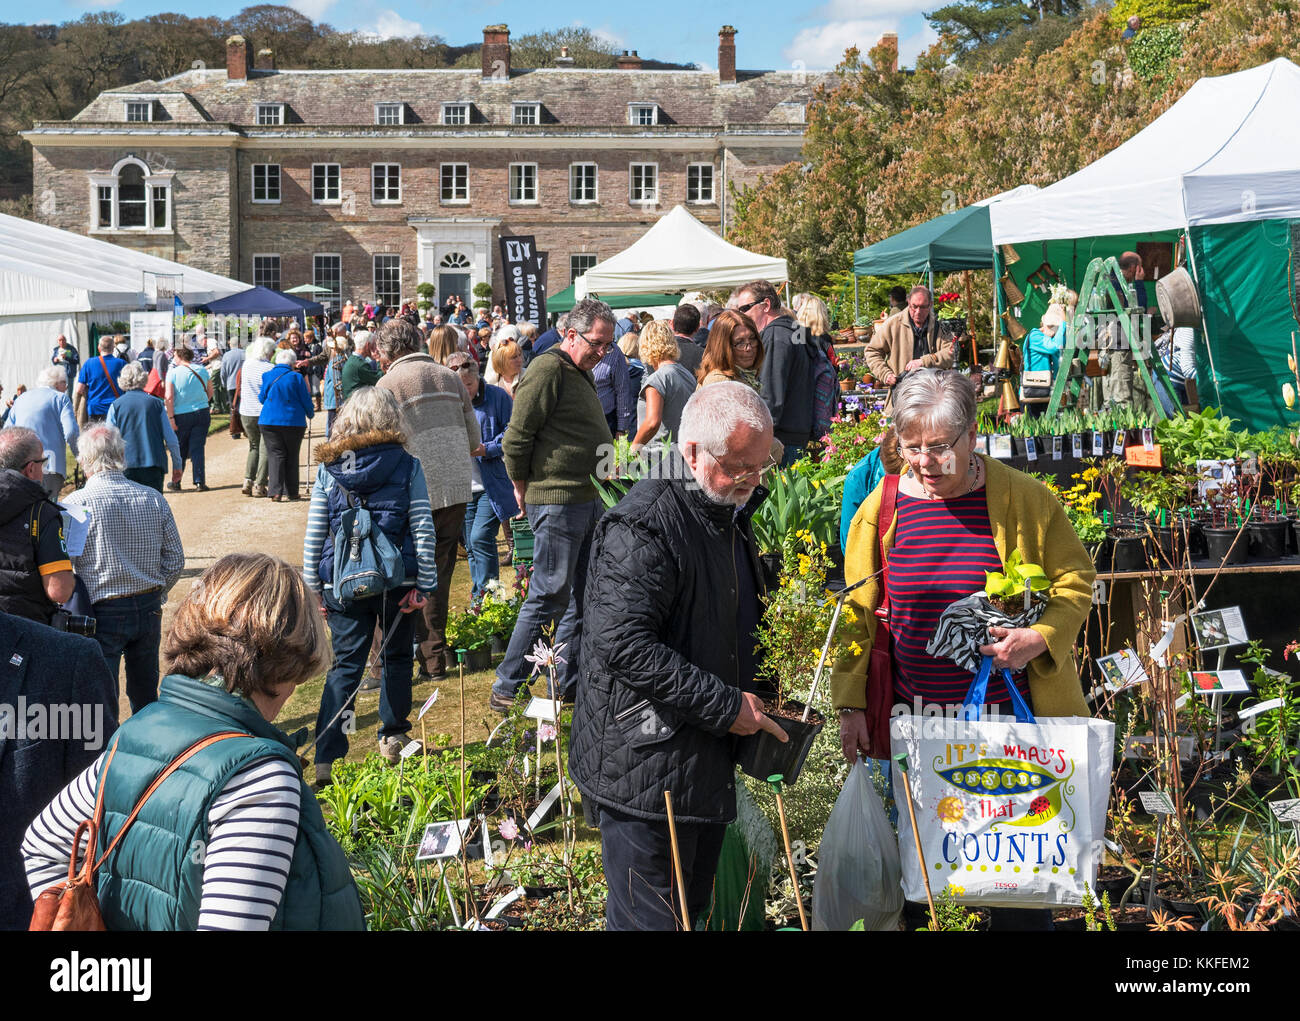 cornwall spring flower show at boconnoc house in cornwall, england, uk. Stock Photo